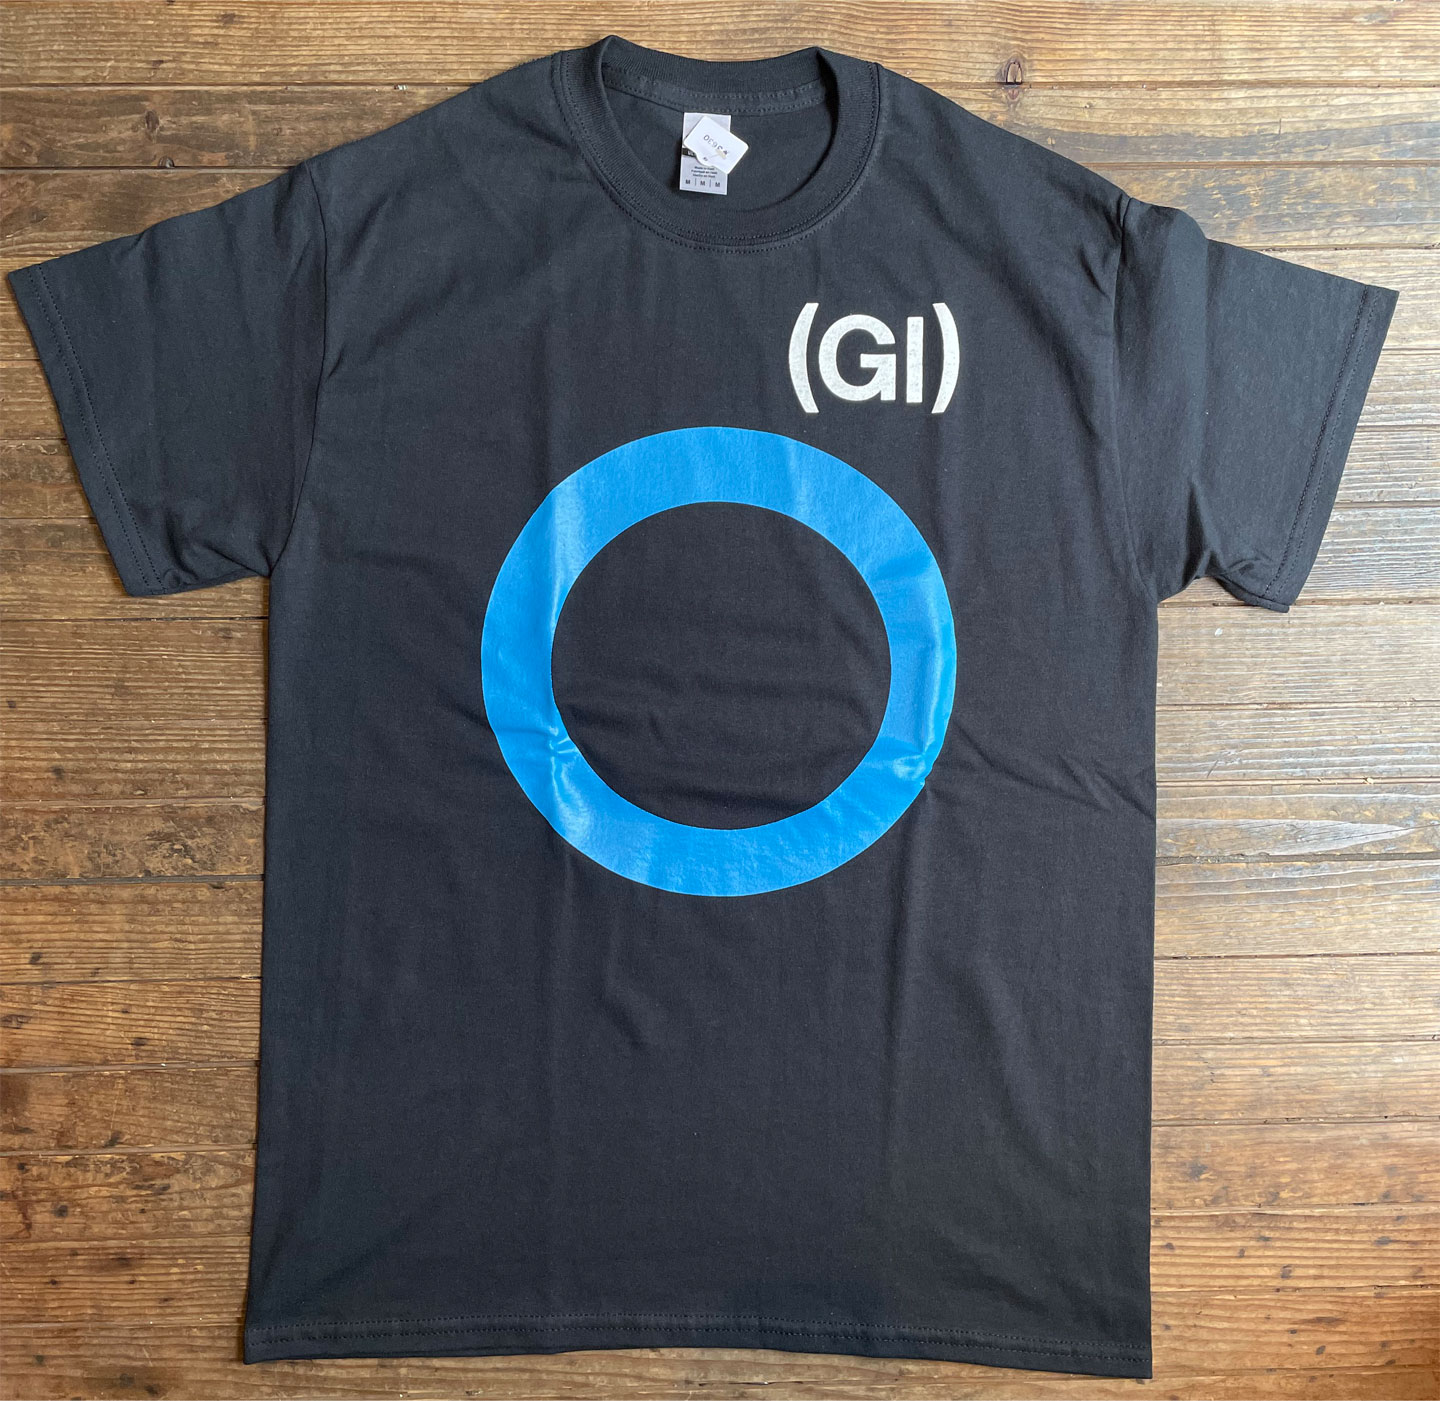 GERMS Tシャツ (GI）